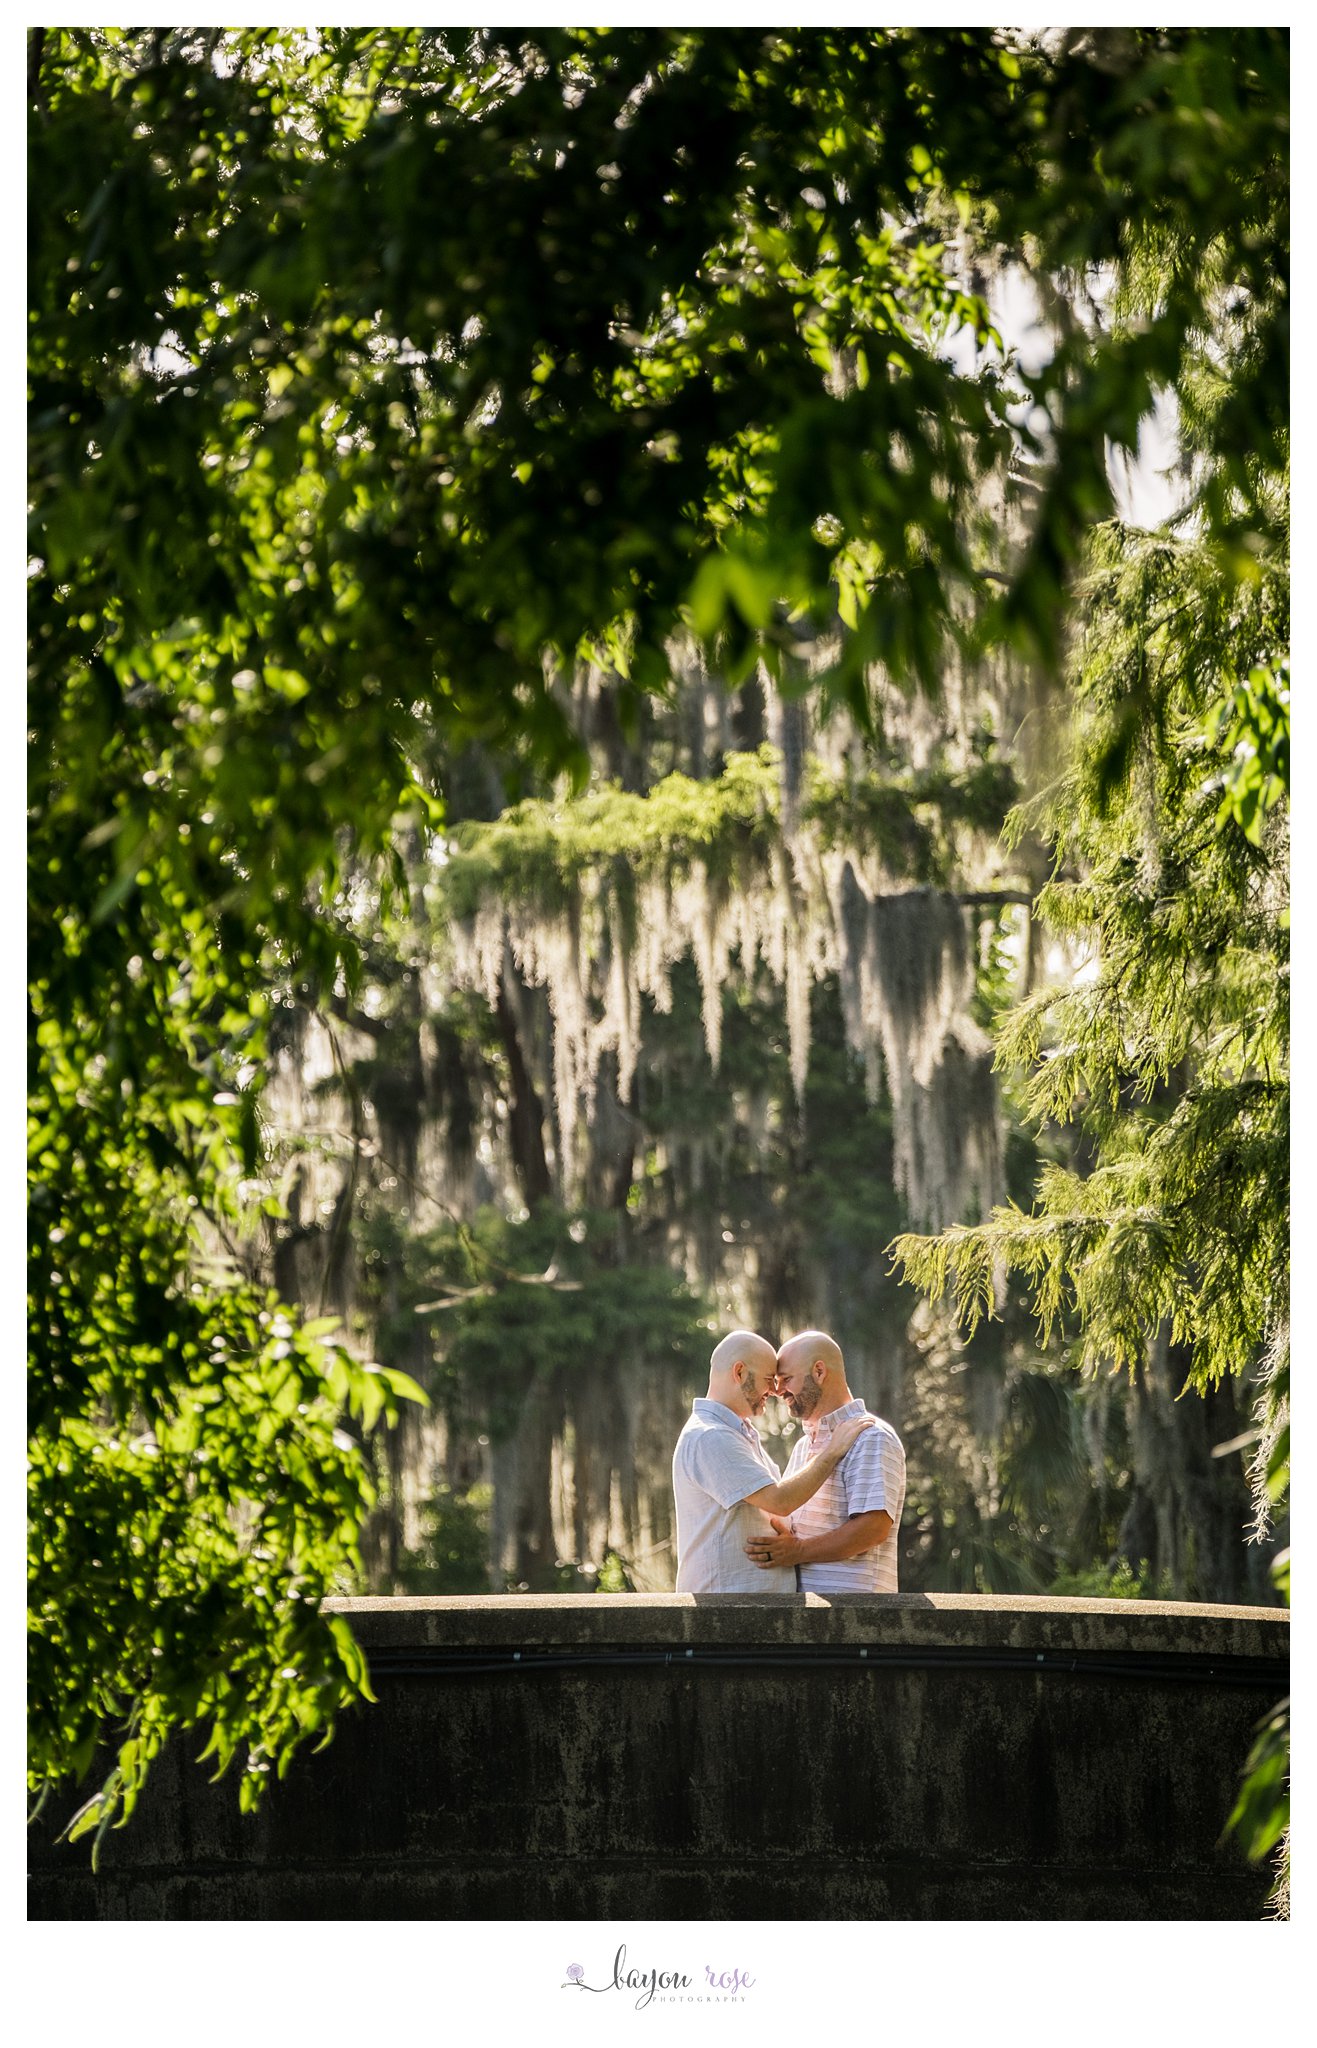 New Orleans,city park,engagements,gay,gay engagement photos,